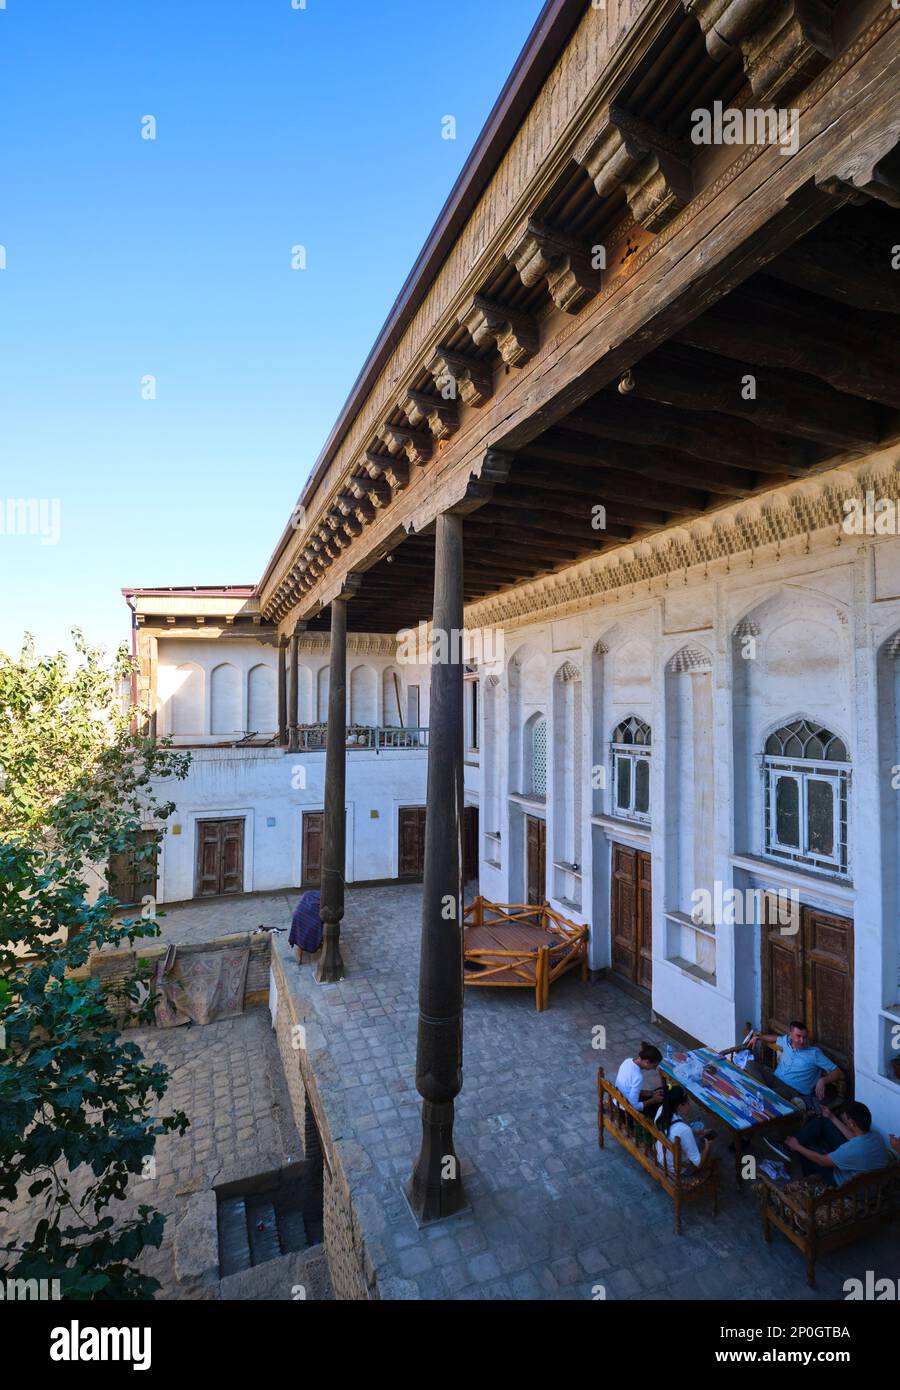 Double height porch, veranda with carved wood columns. At an old, historic, classic, traditional, typical, iconic Jewish house in Bukhara, Uzbekistan, Stock Photo